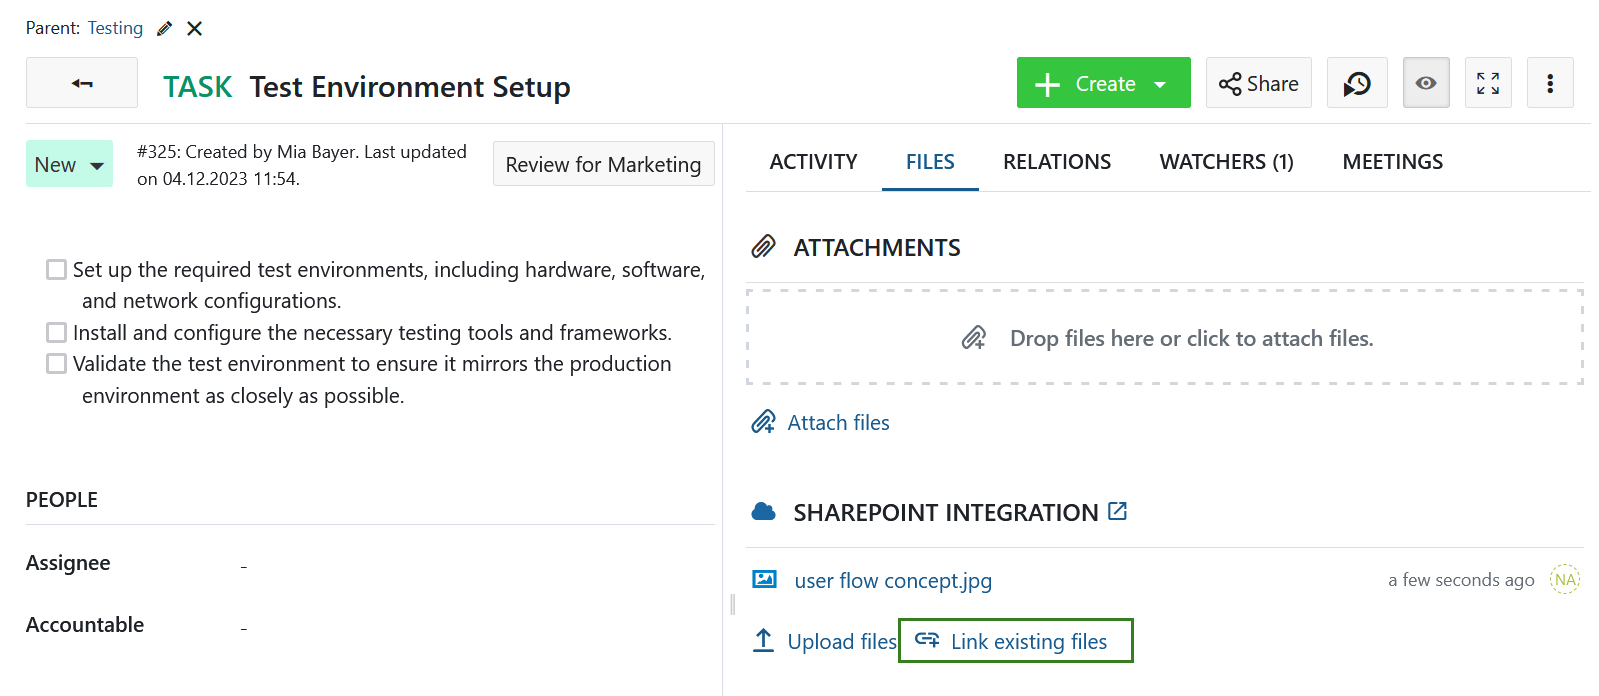 Link files from OneDrive/SharePoint to OpenProject